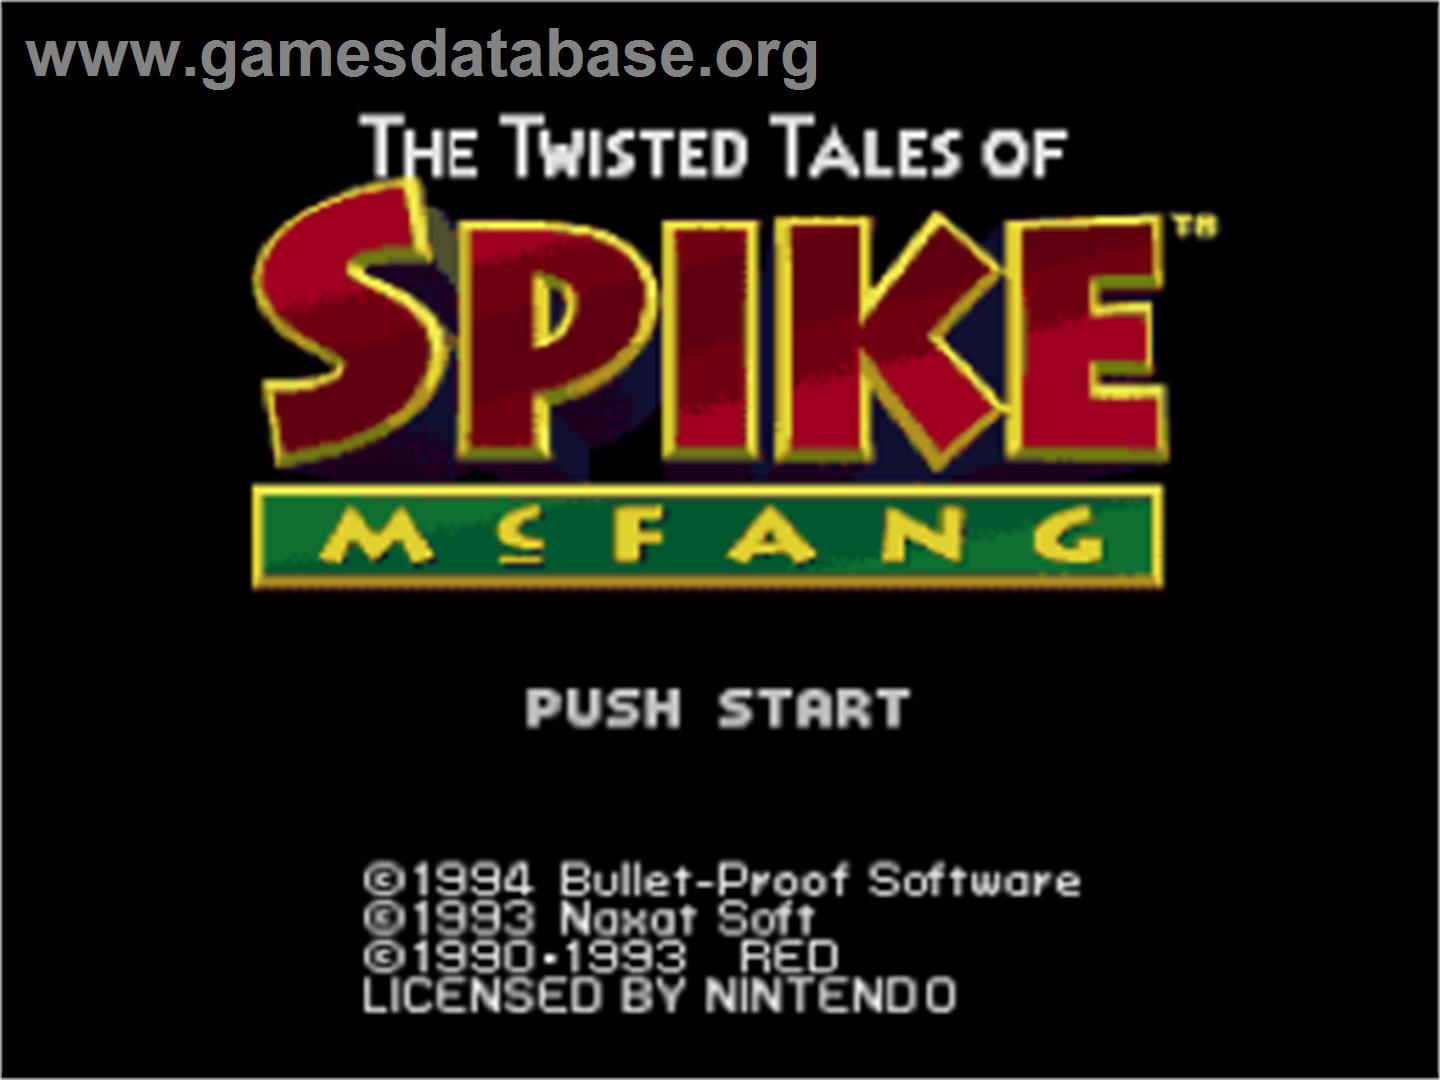 The Twisted Tales of Spike McFang - Nintendo SNES - Artwork - Title Screen